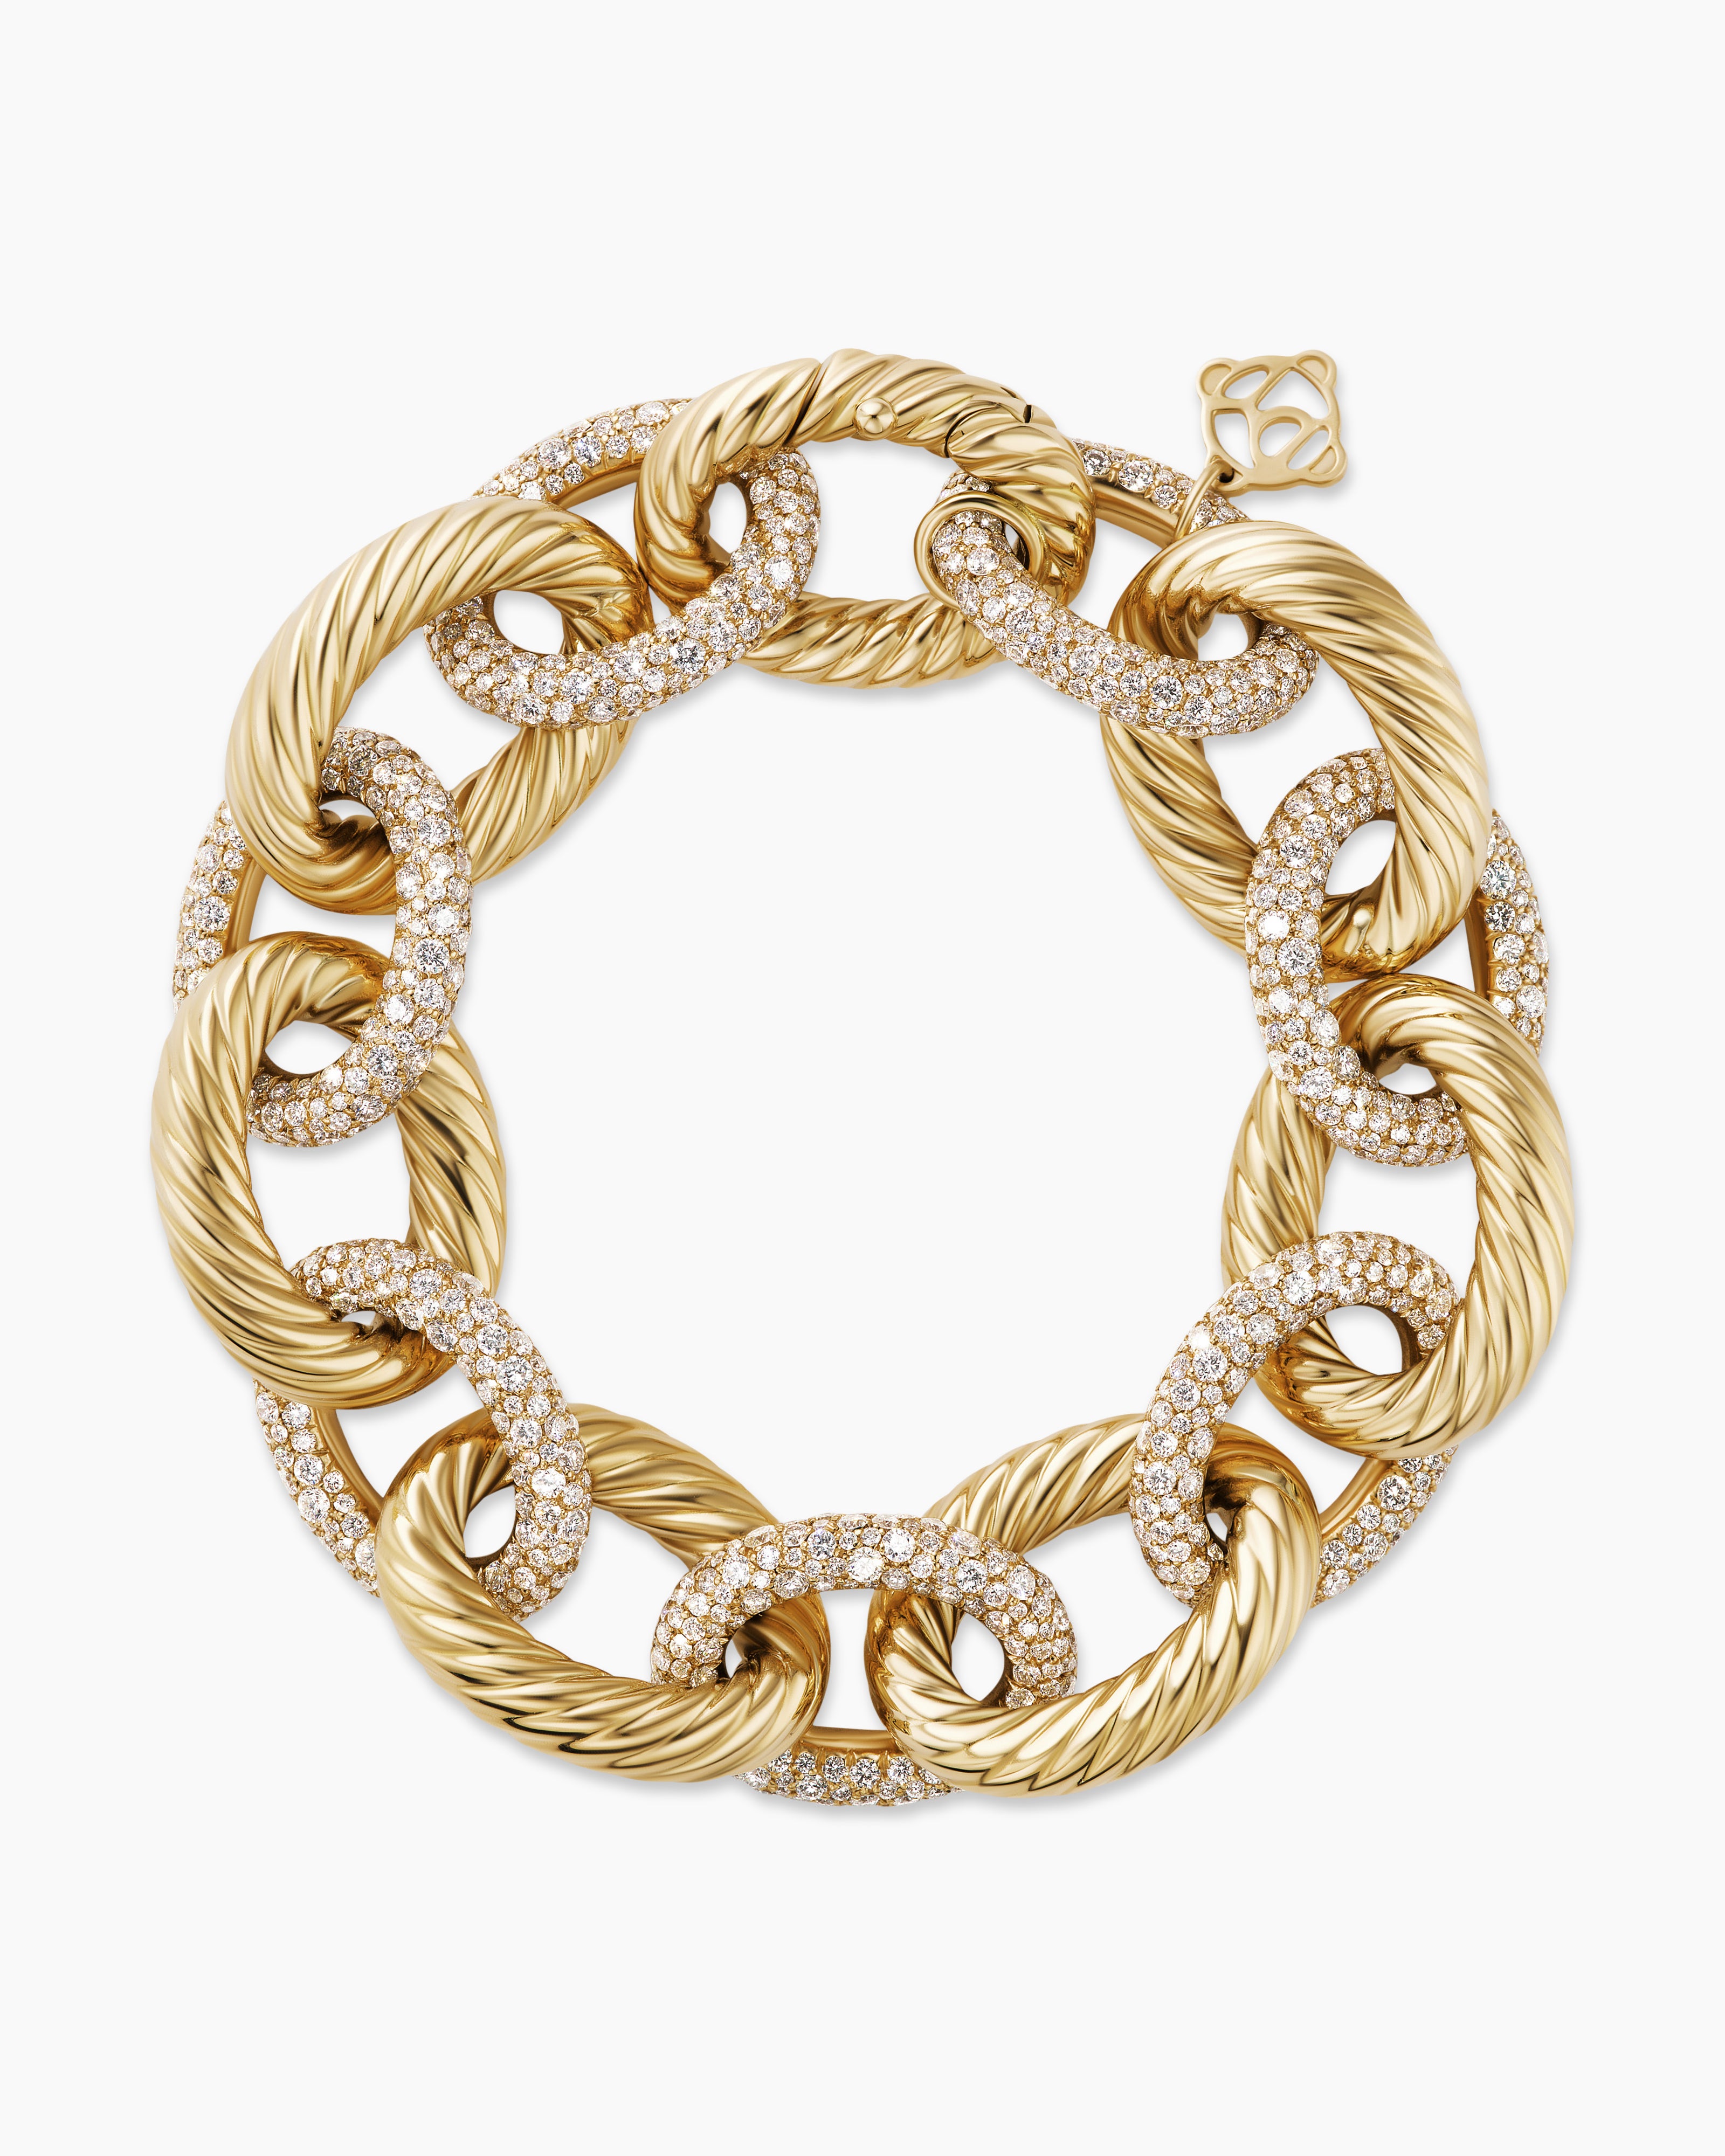 David Yurman Extra Large Oval Link Bracelet – QUEEN MAY